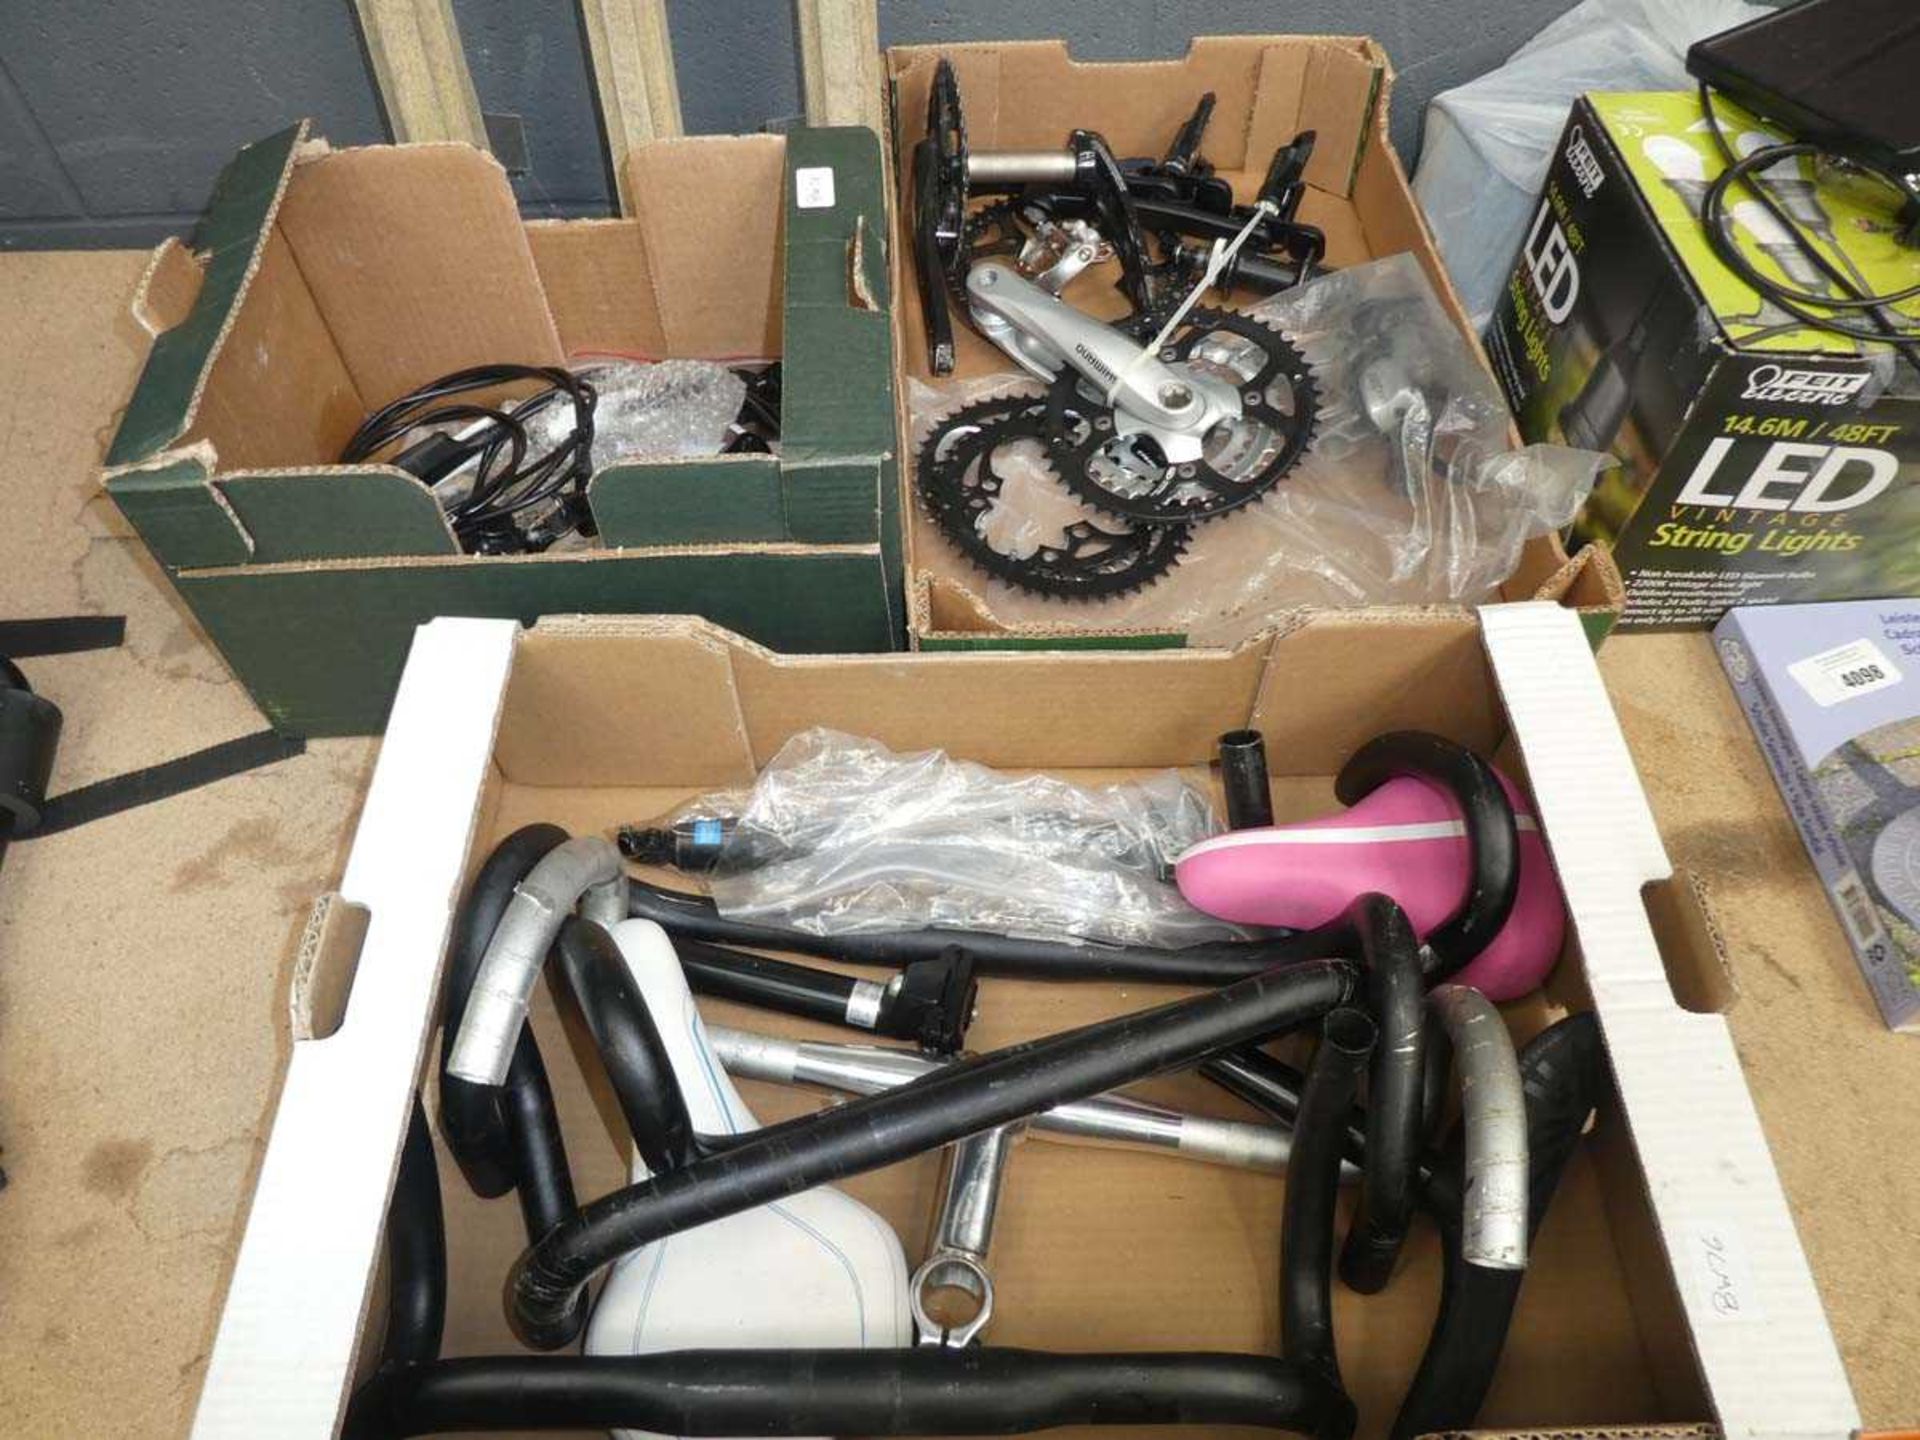 3 boxes of assorted bike parts